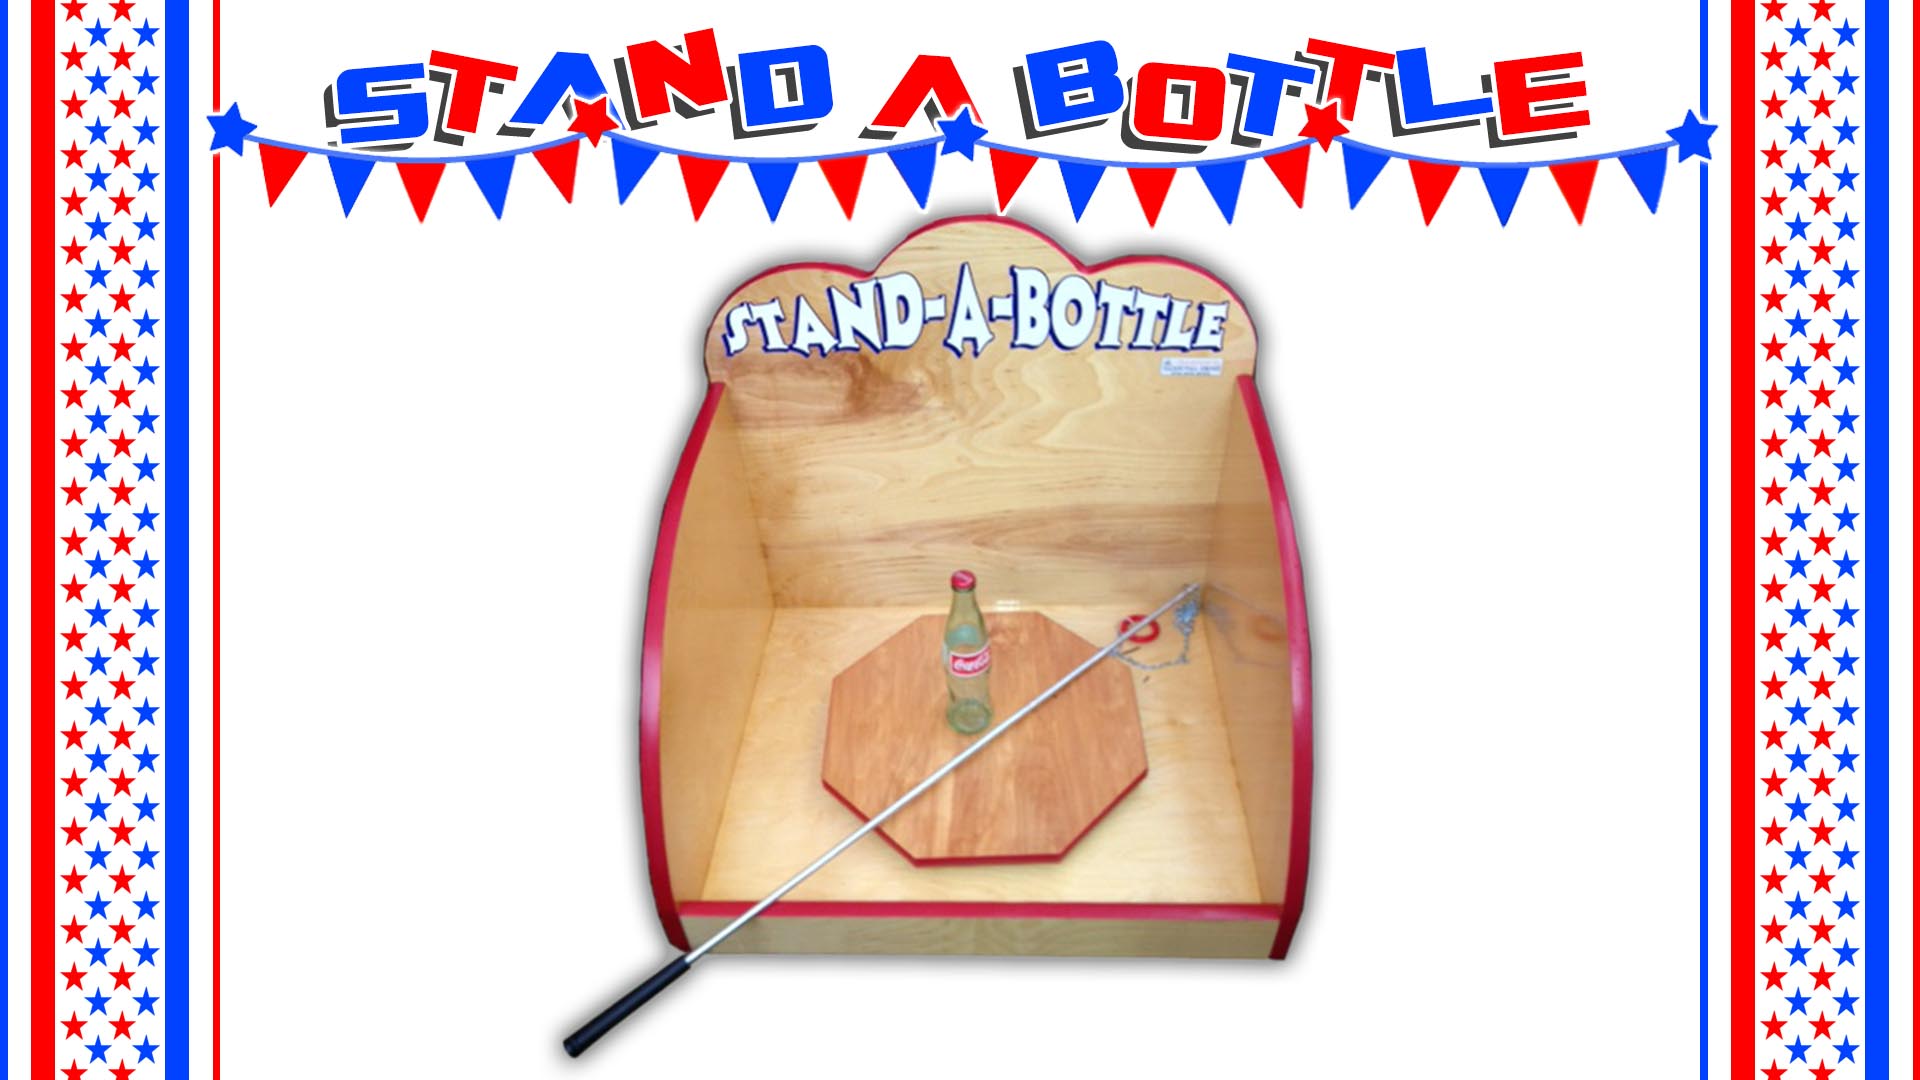 stand the bottle carnival game